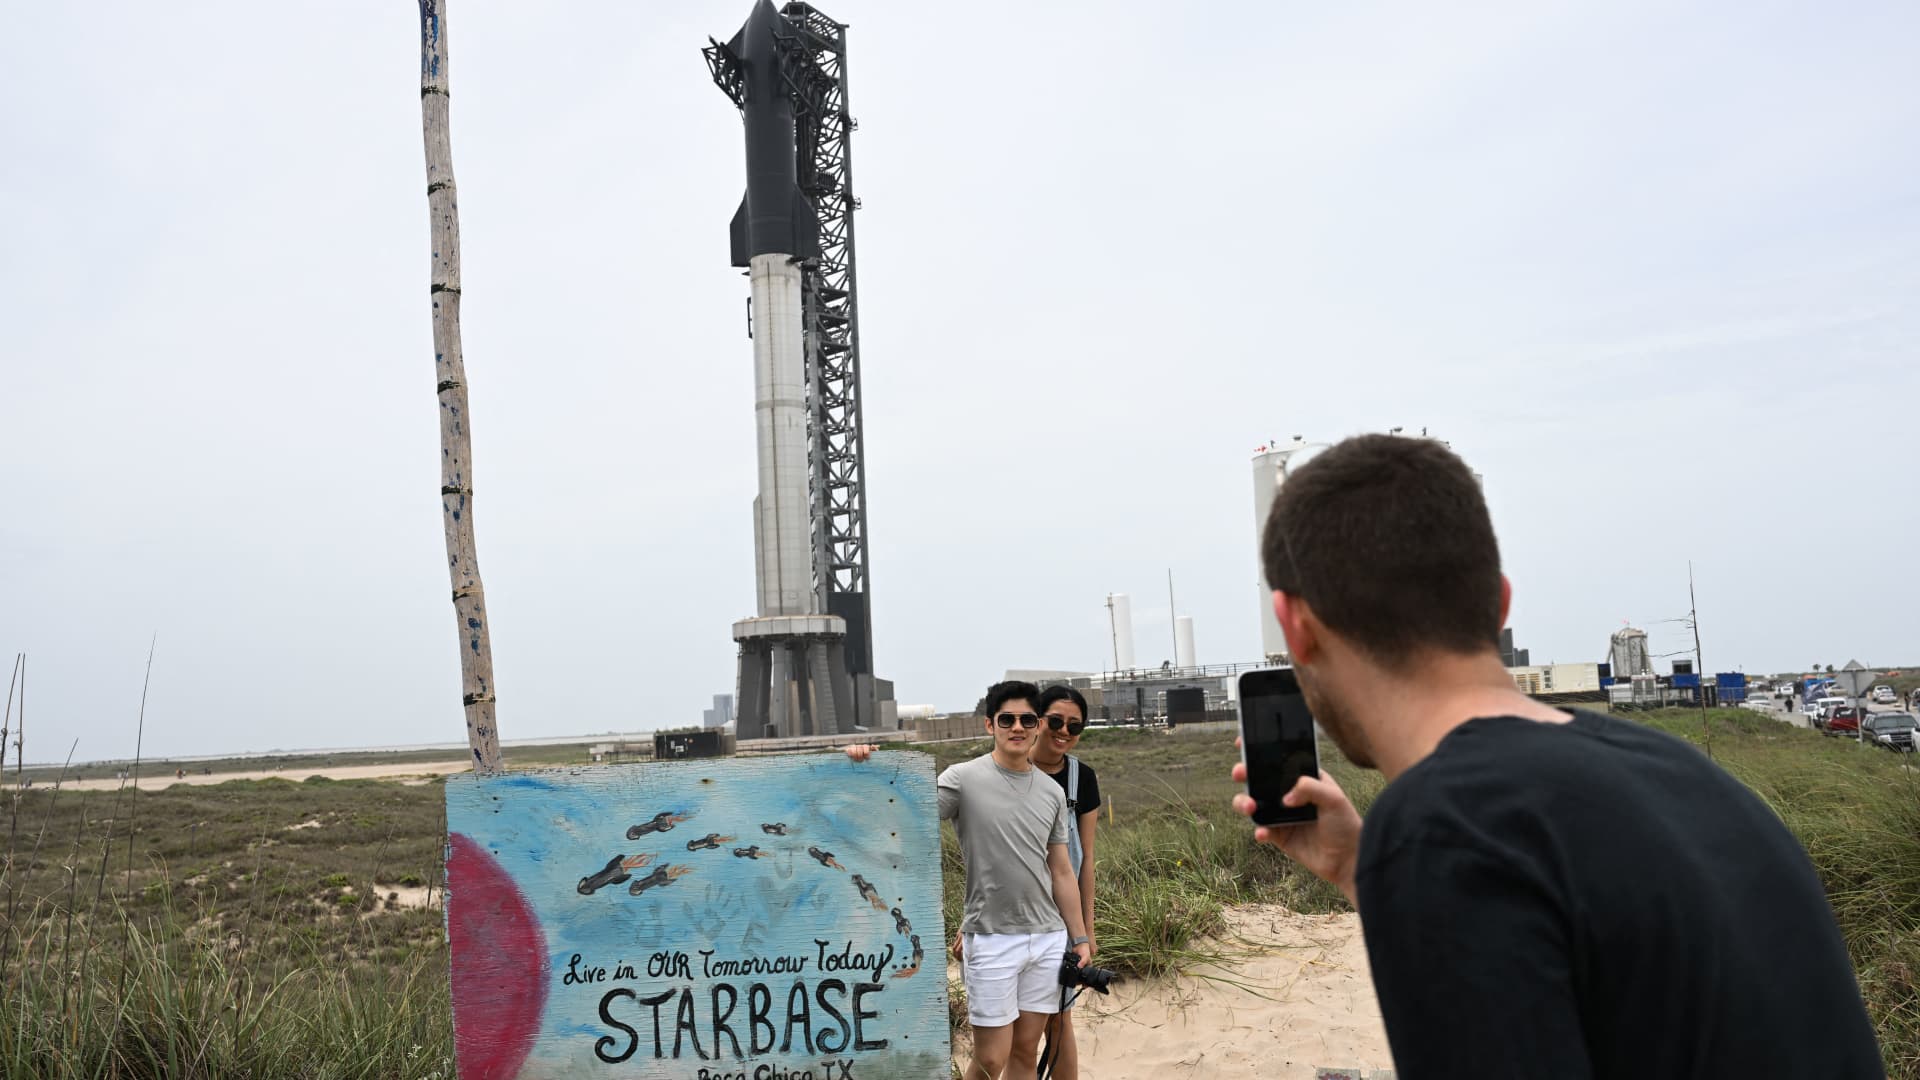 People take pictures of the rocket garden ahead of the SpaceX Starship flight test from Starbase in Boca Chica, Texas on April 16, 2023. 